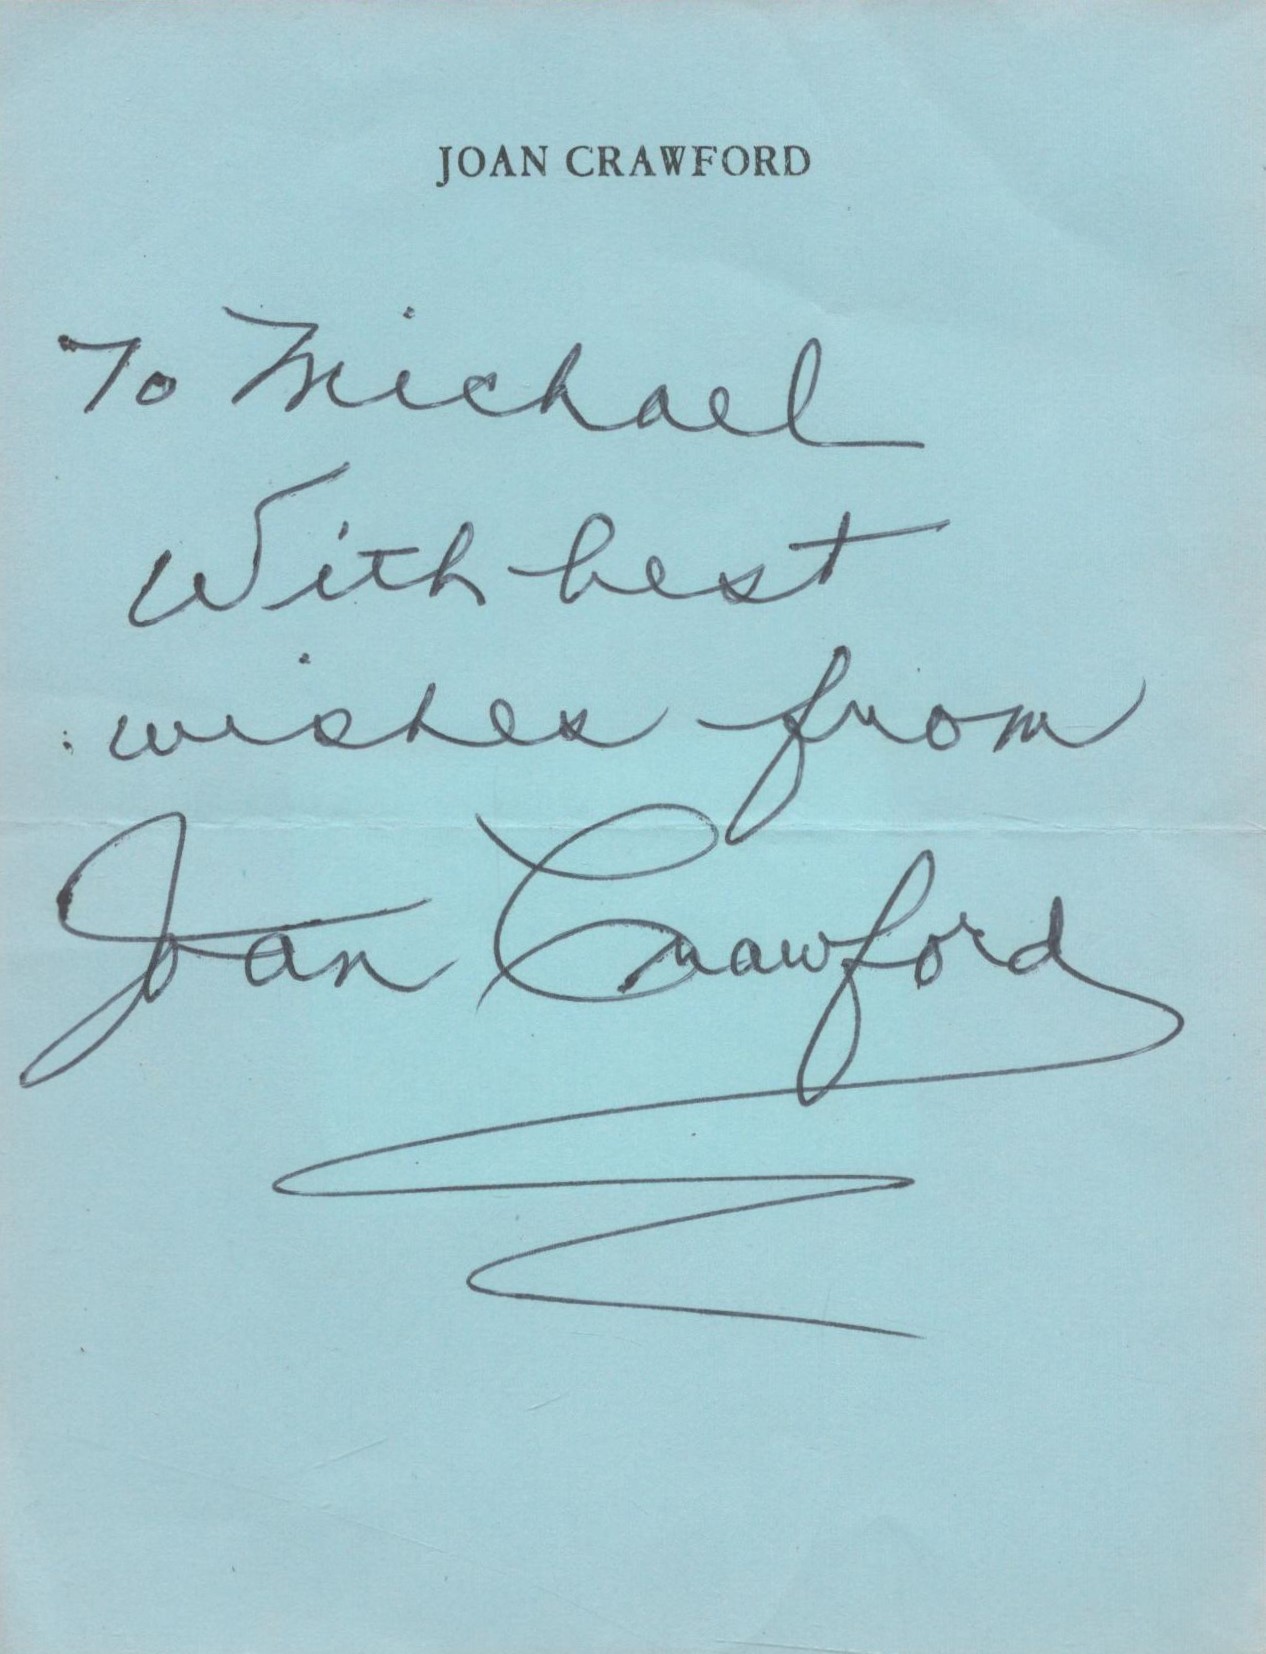 Joan Crawford hand written note on personal stationary 6 x 4 inch, To Michael best wishes. Good